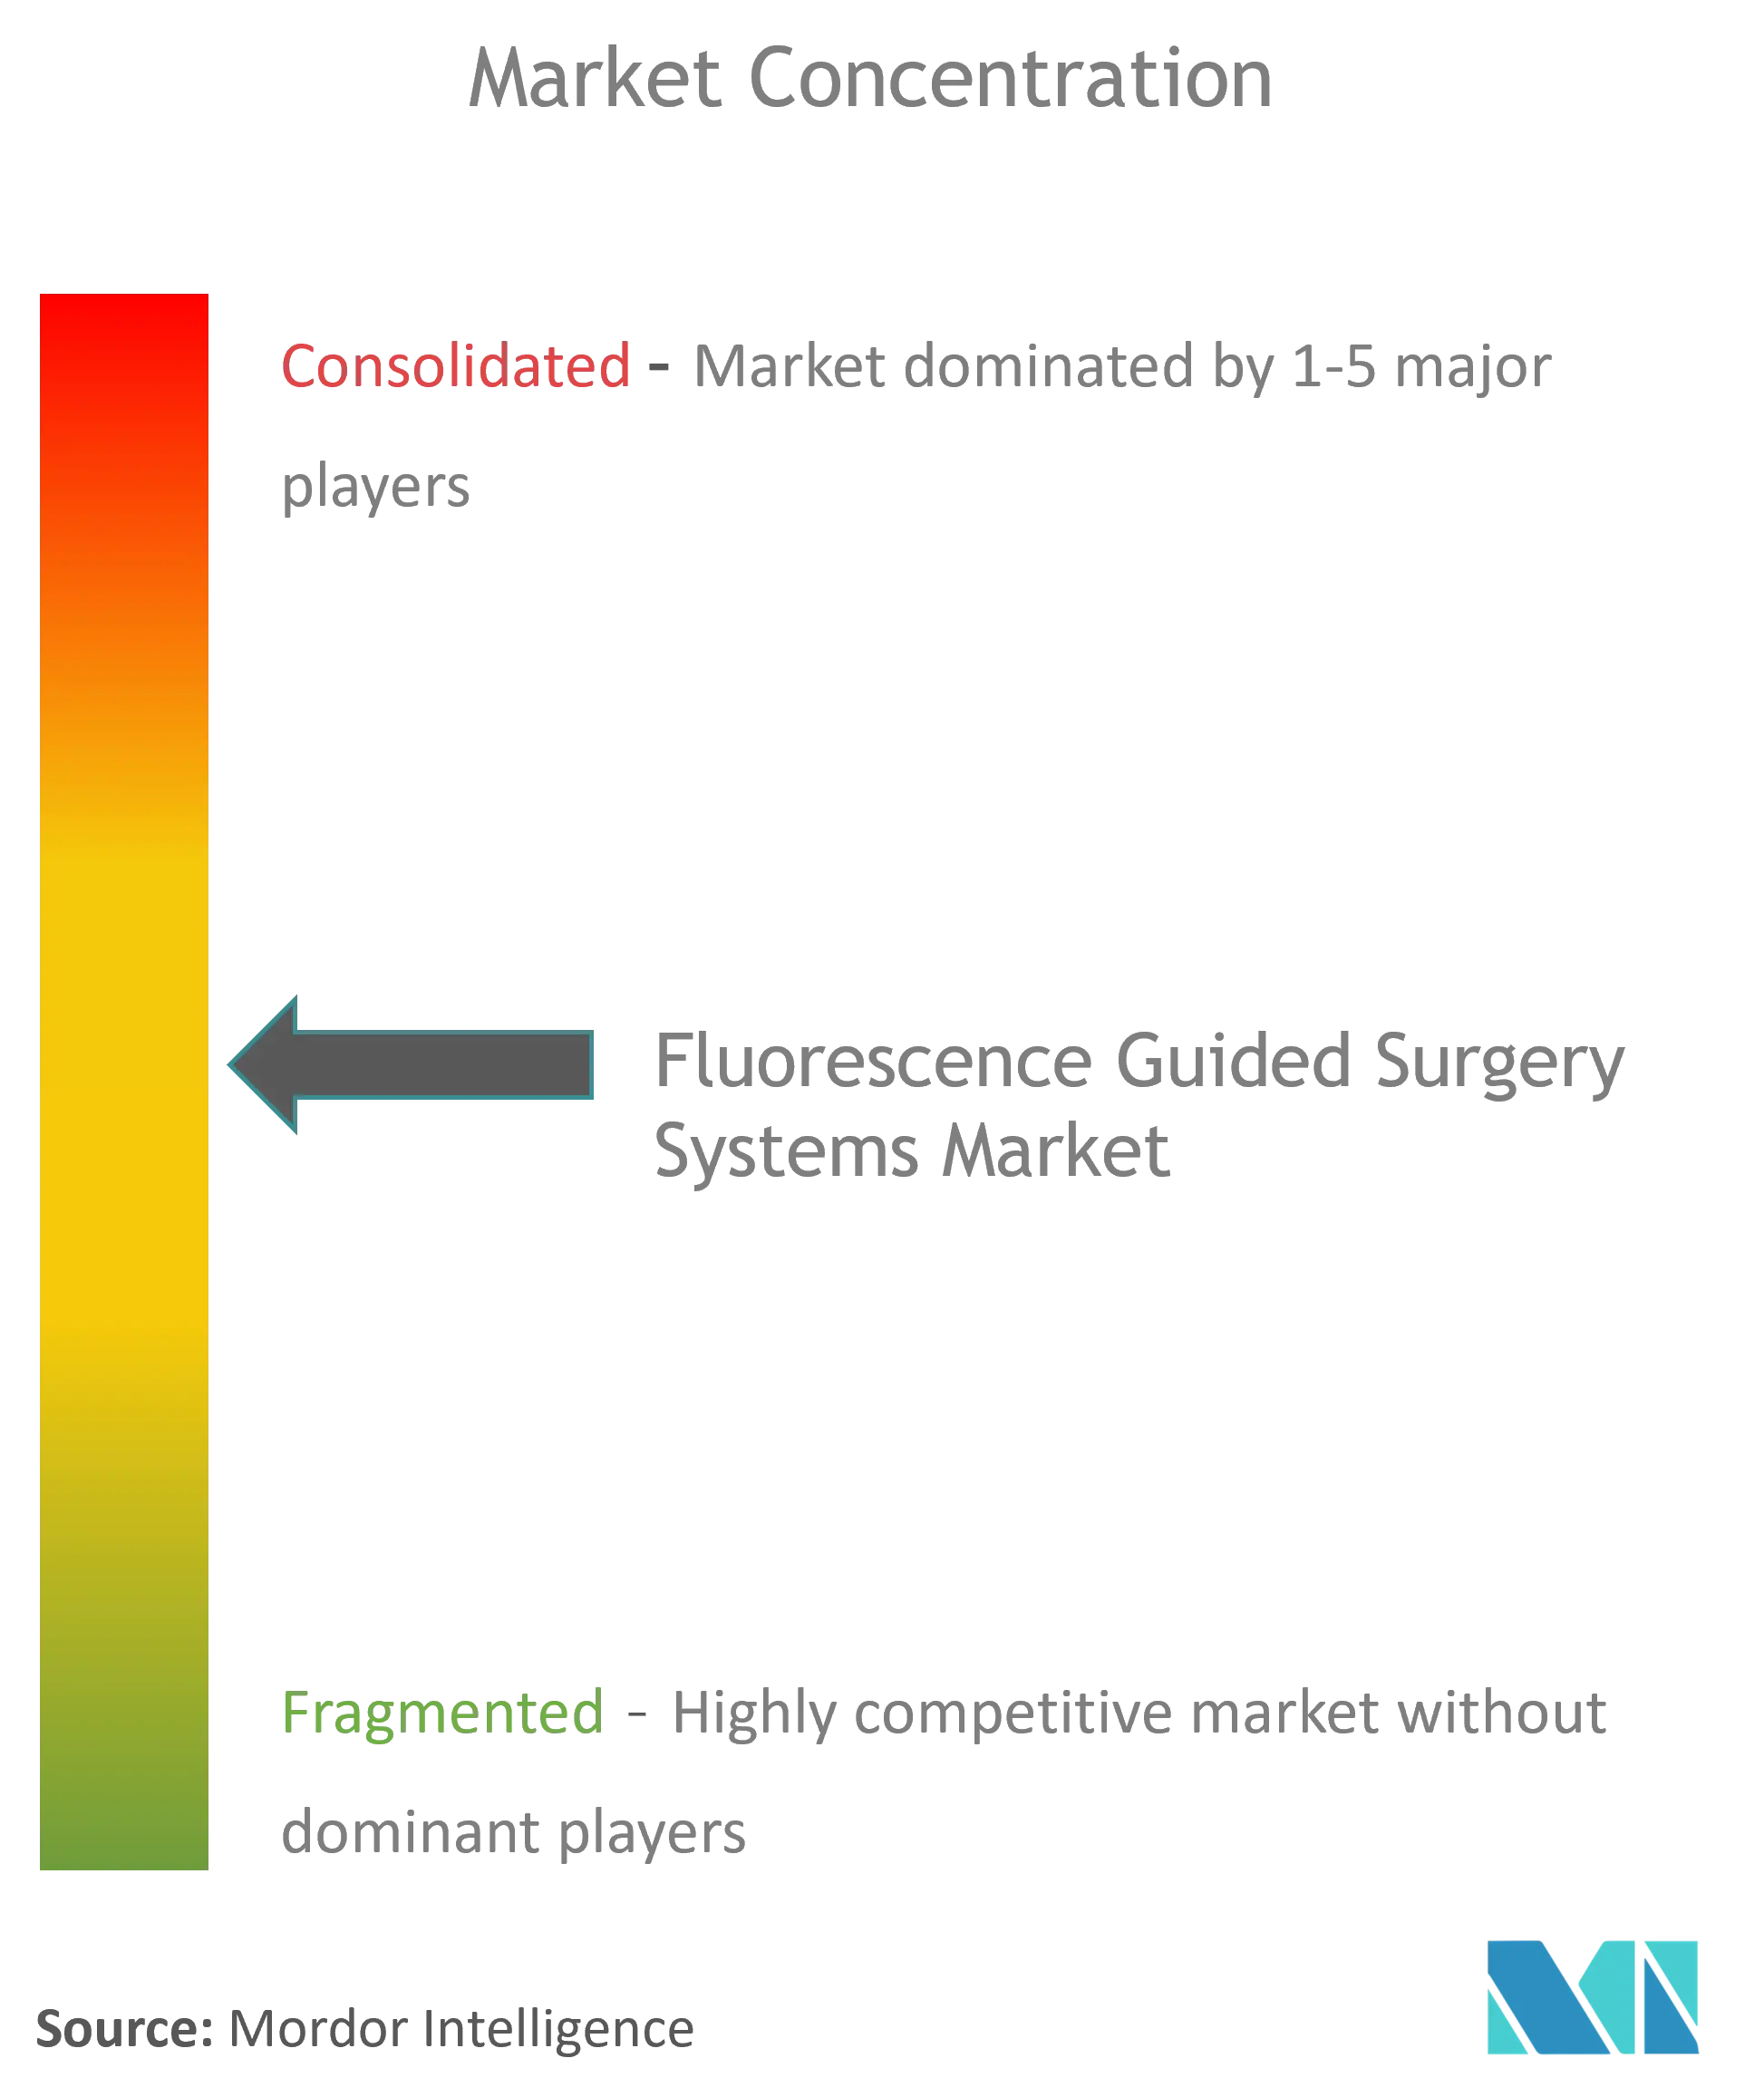 Fluorescence Guided Surgery System Market Concentration